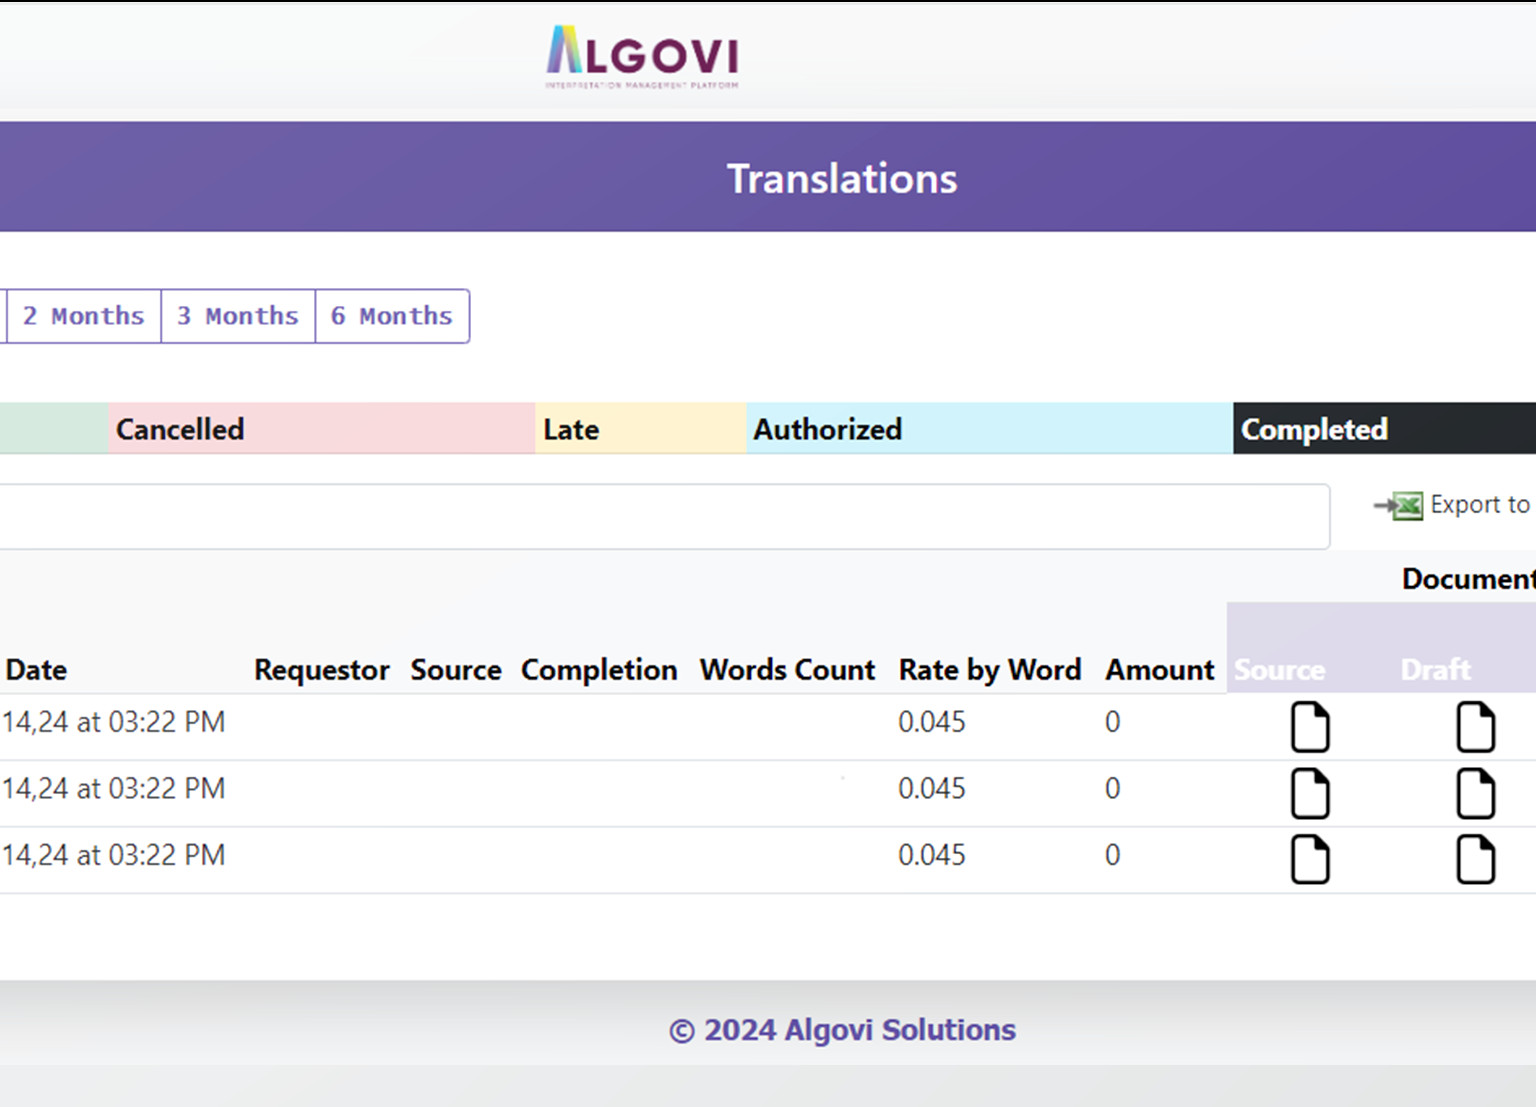 Screenshot of a digital translation management dashboard with tabs for translation status such as cancelled, late, authorized, and completed, displaying list of jobs with details like date, rate, and source.